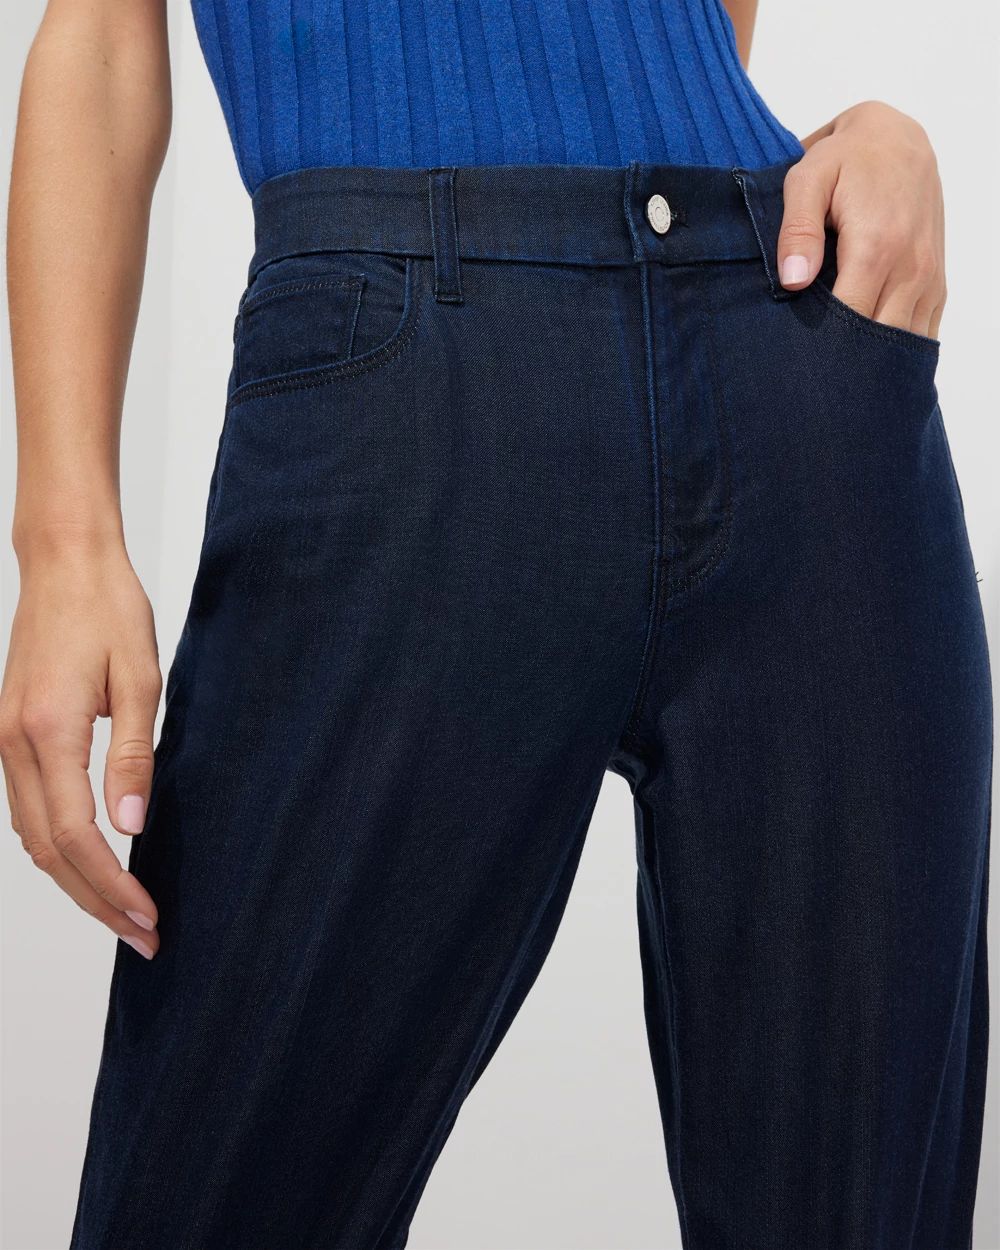 Outlet WHBM High-Rise Wide-Leg Jeans click to view larger image.